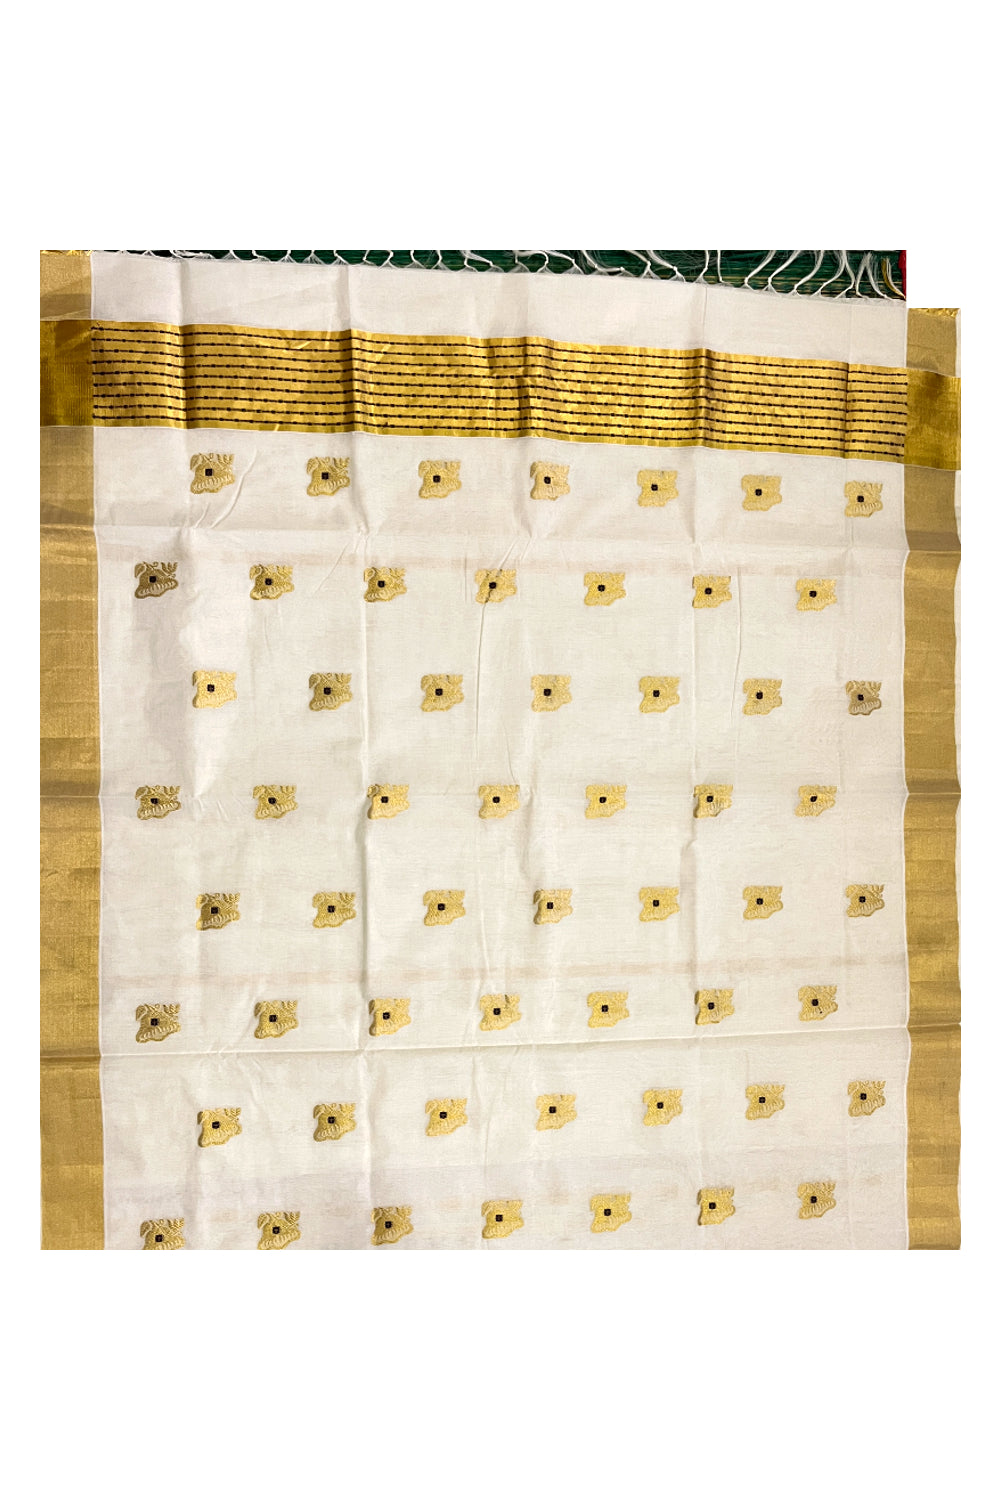 Southloom Premium Handloom Cotton Saree with Kasavu Floral Woven Works on Body